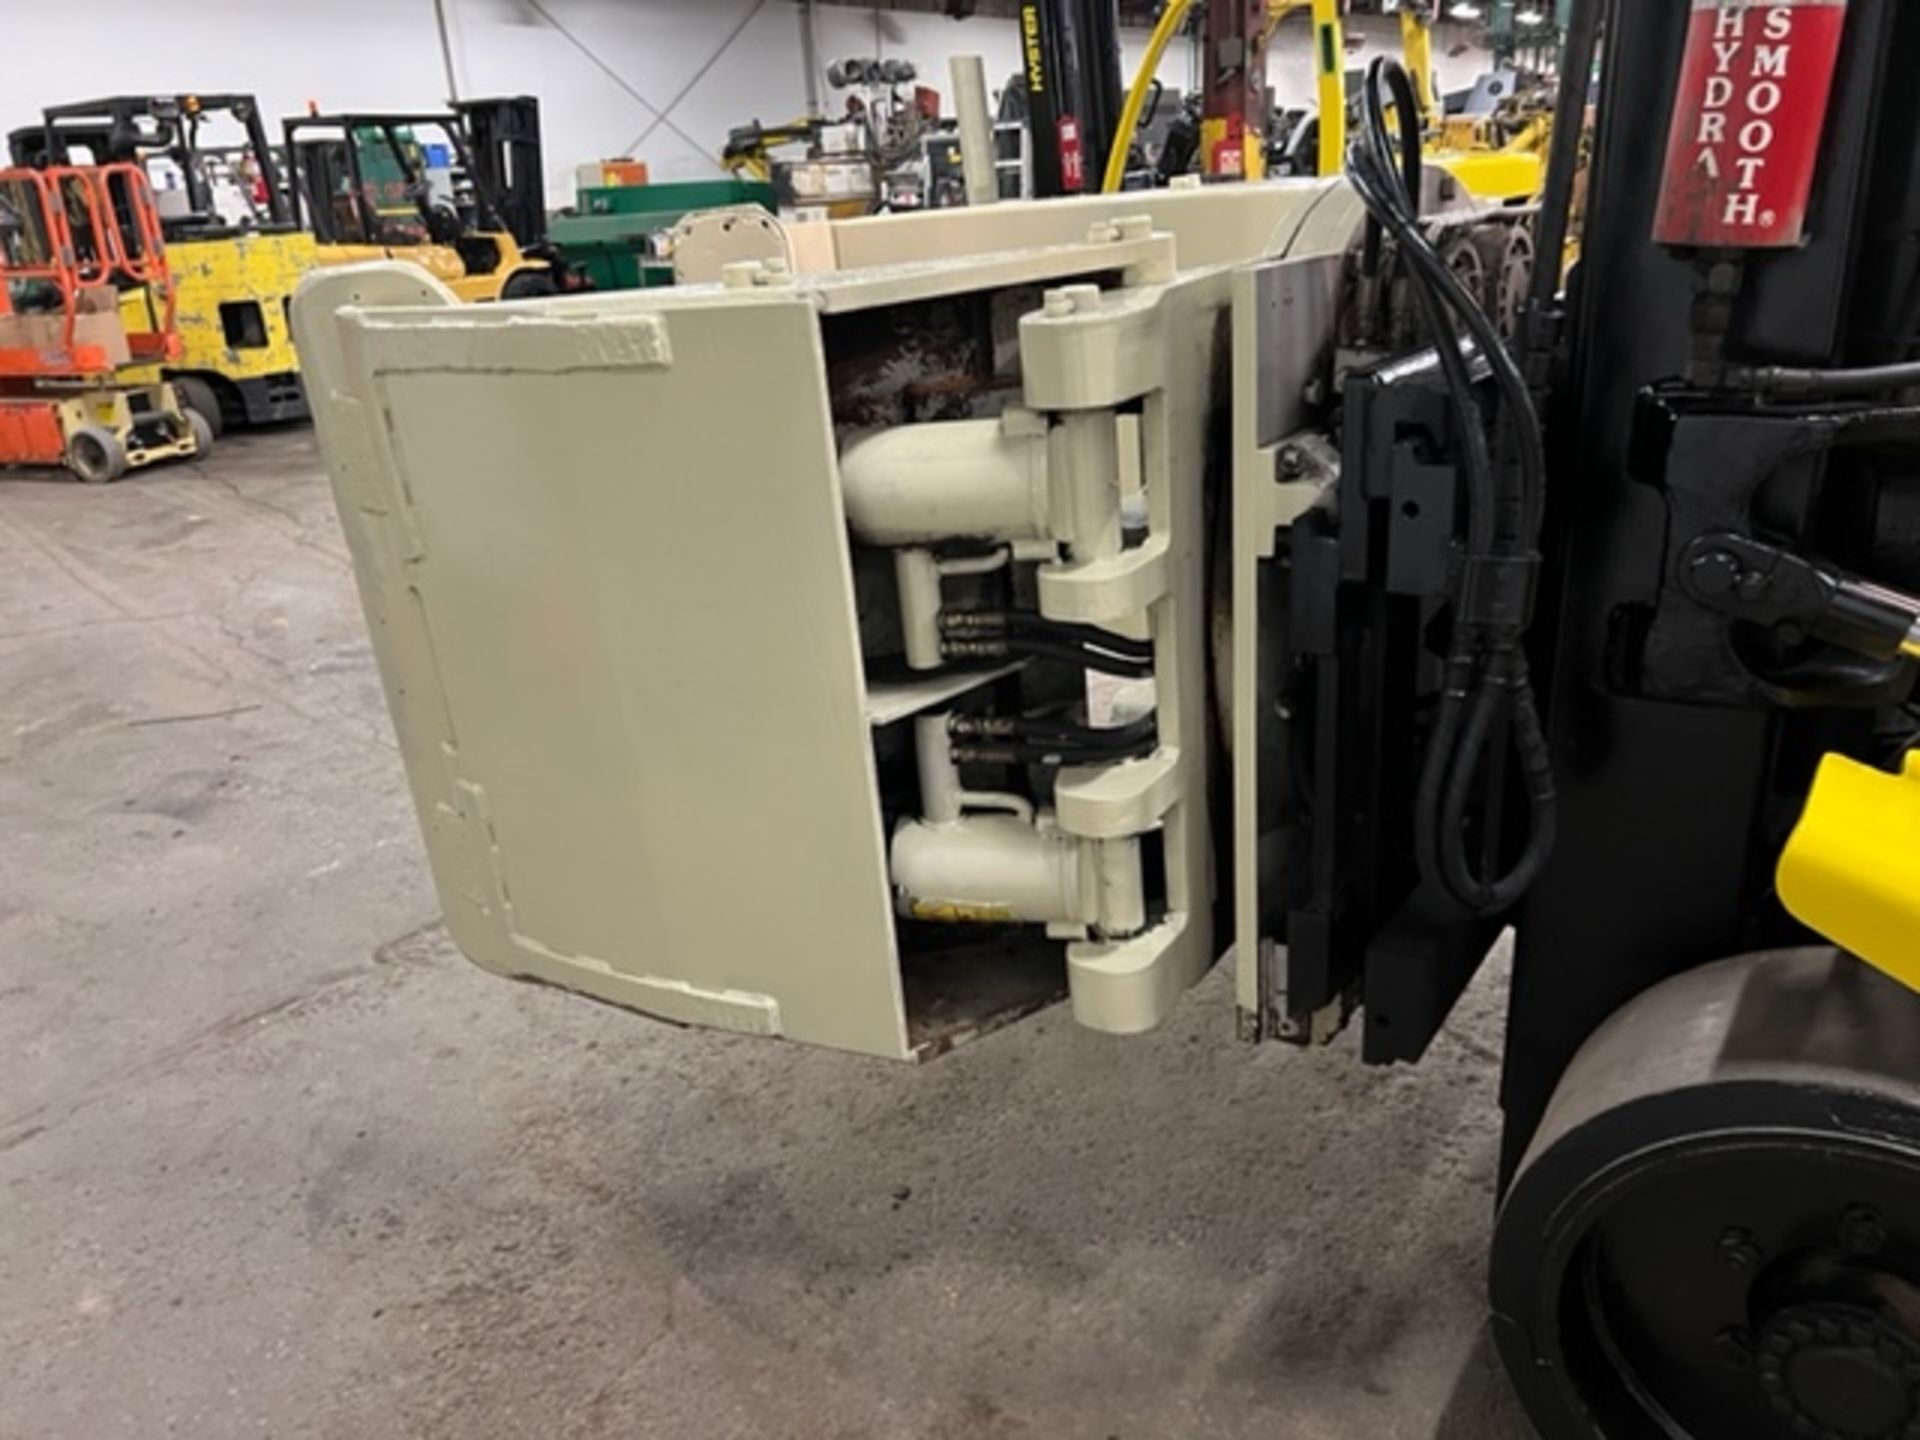 FREE CUSTOMS - Hyster model 155 15,500lbs Capacity OUTDOOR Forklift LPG (propane) Cascade Clamp - Image 3 of 4